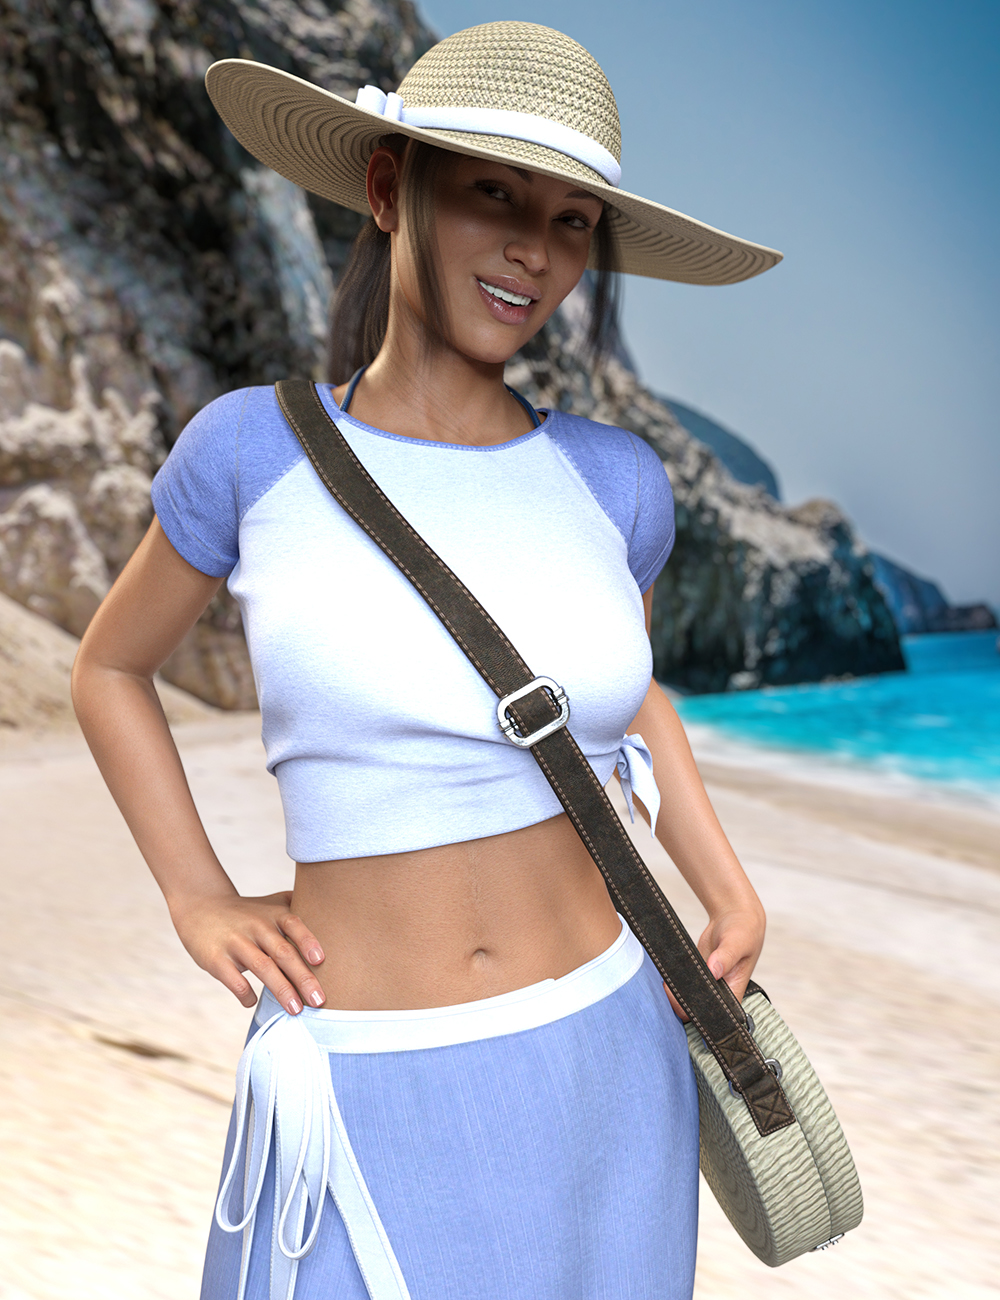 It’s Always Summer Outfit For Genesis 8 Females (Repost)